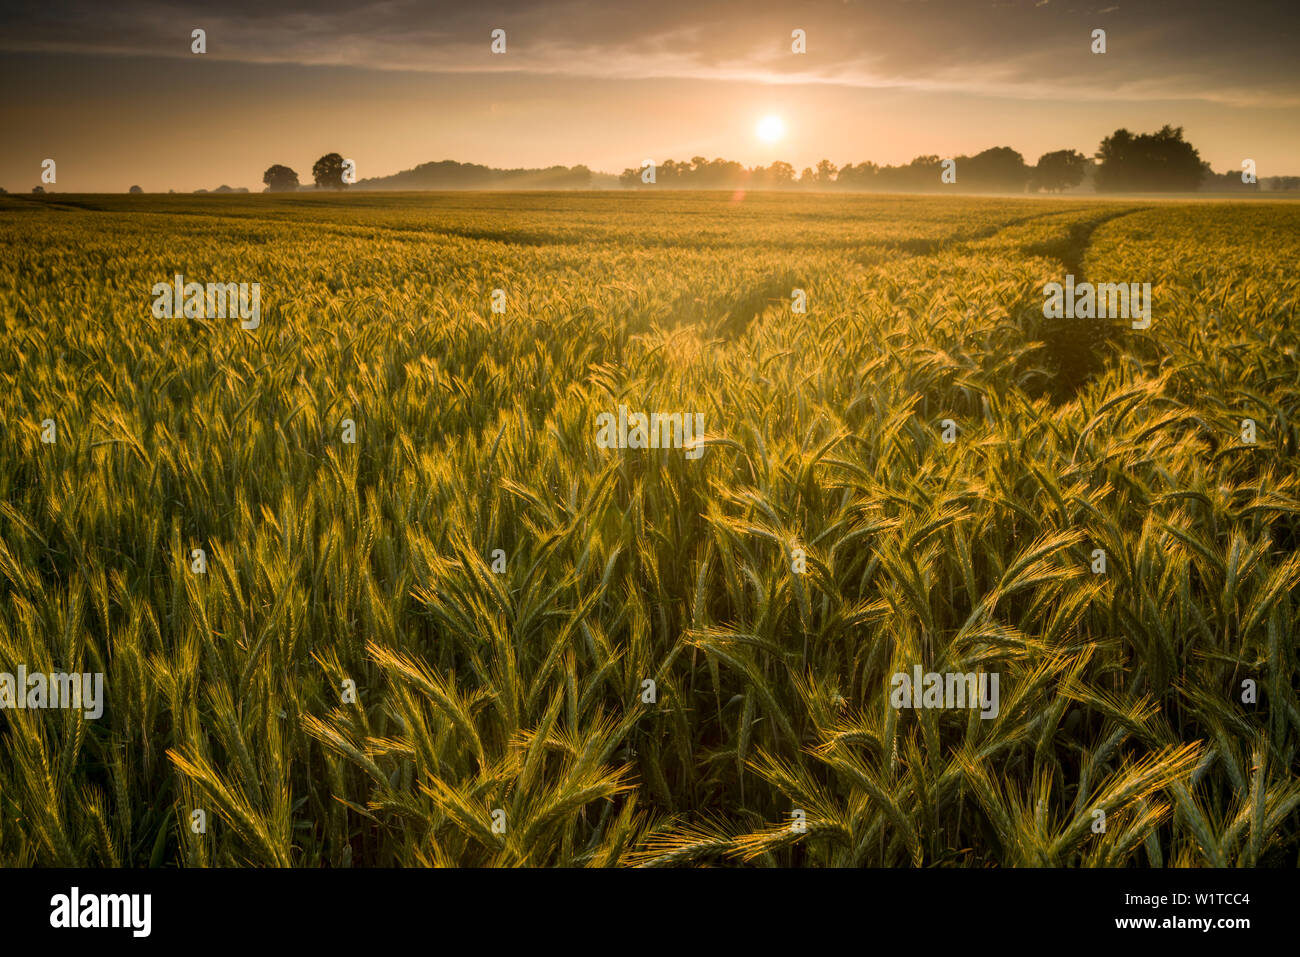 Rye field at sunset, Harpstedt, Oldenburg, Wildeshauser Geest, Lower Saxony, Germany Stock Photo